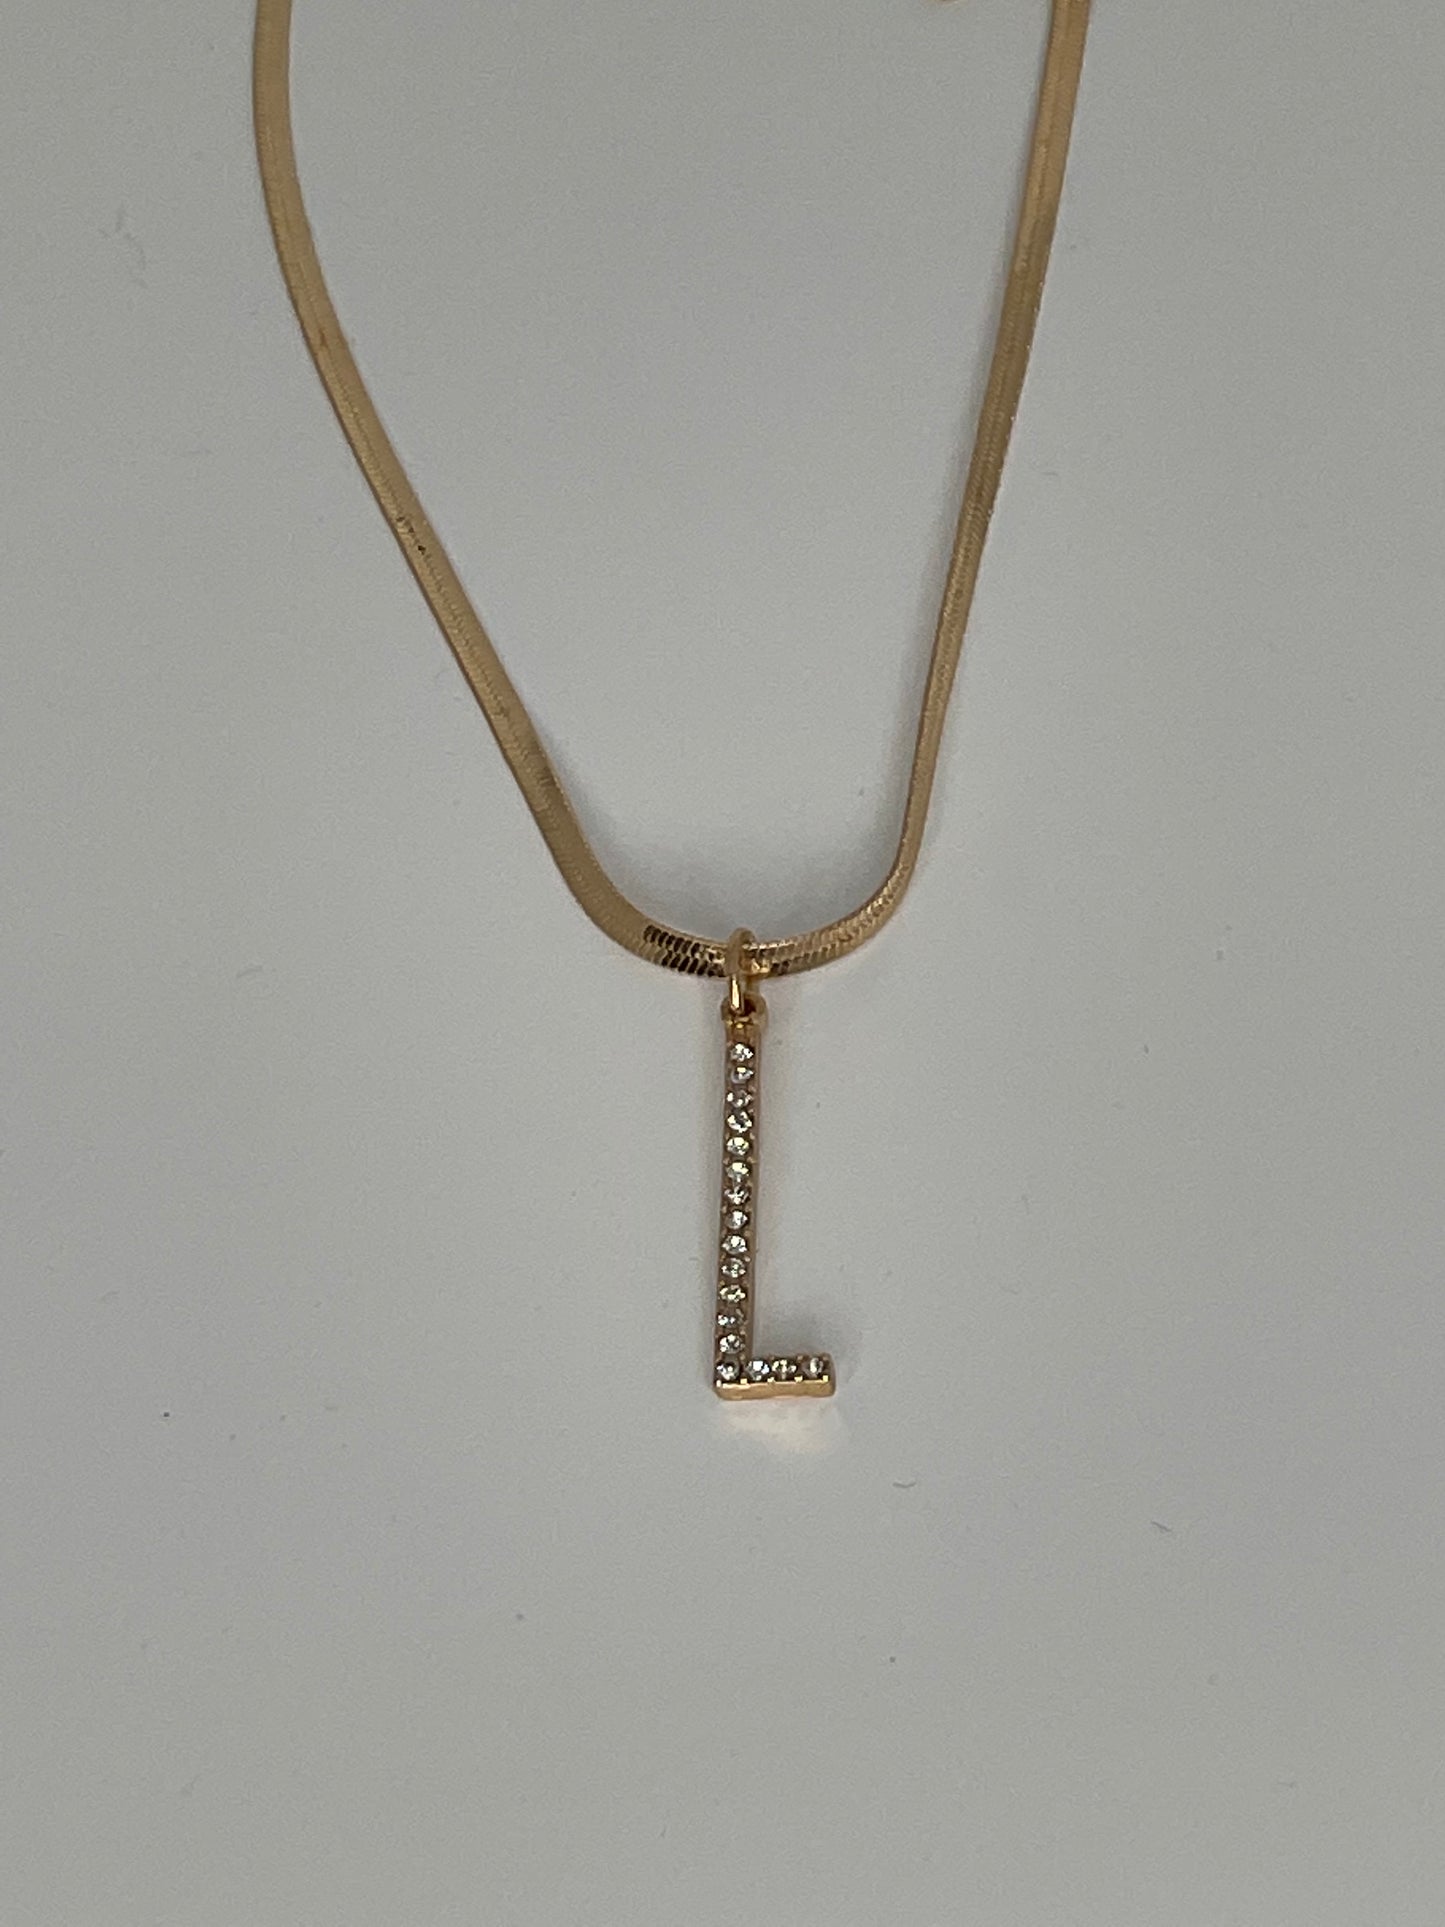 Rhinestone Initial on Snake Chain Necklace (Variety)